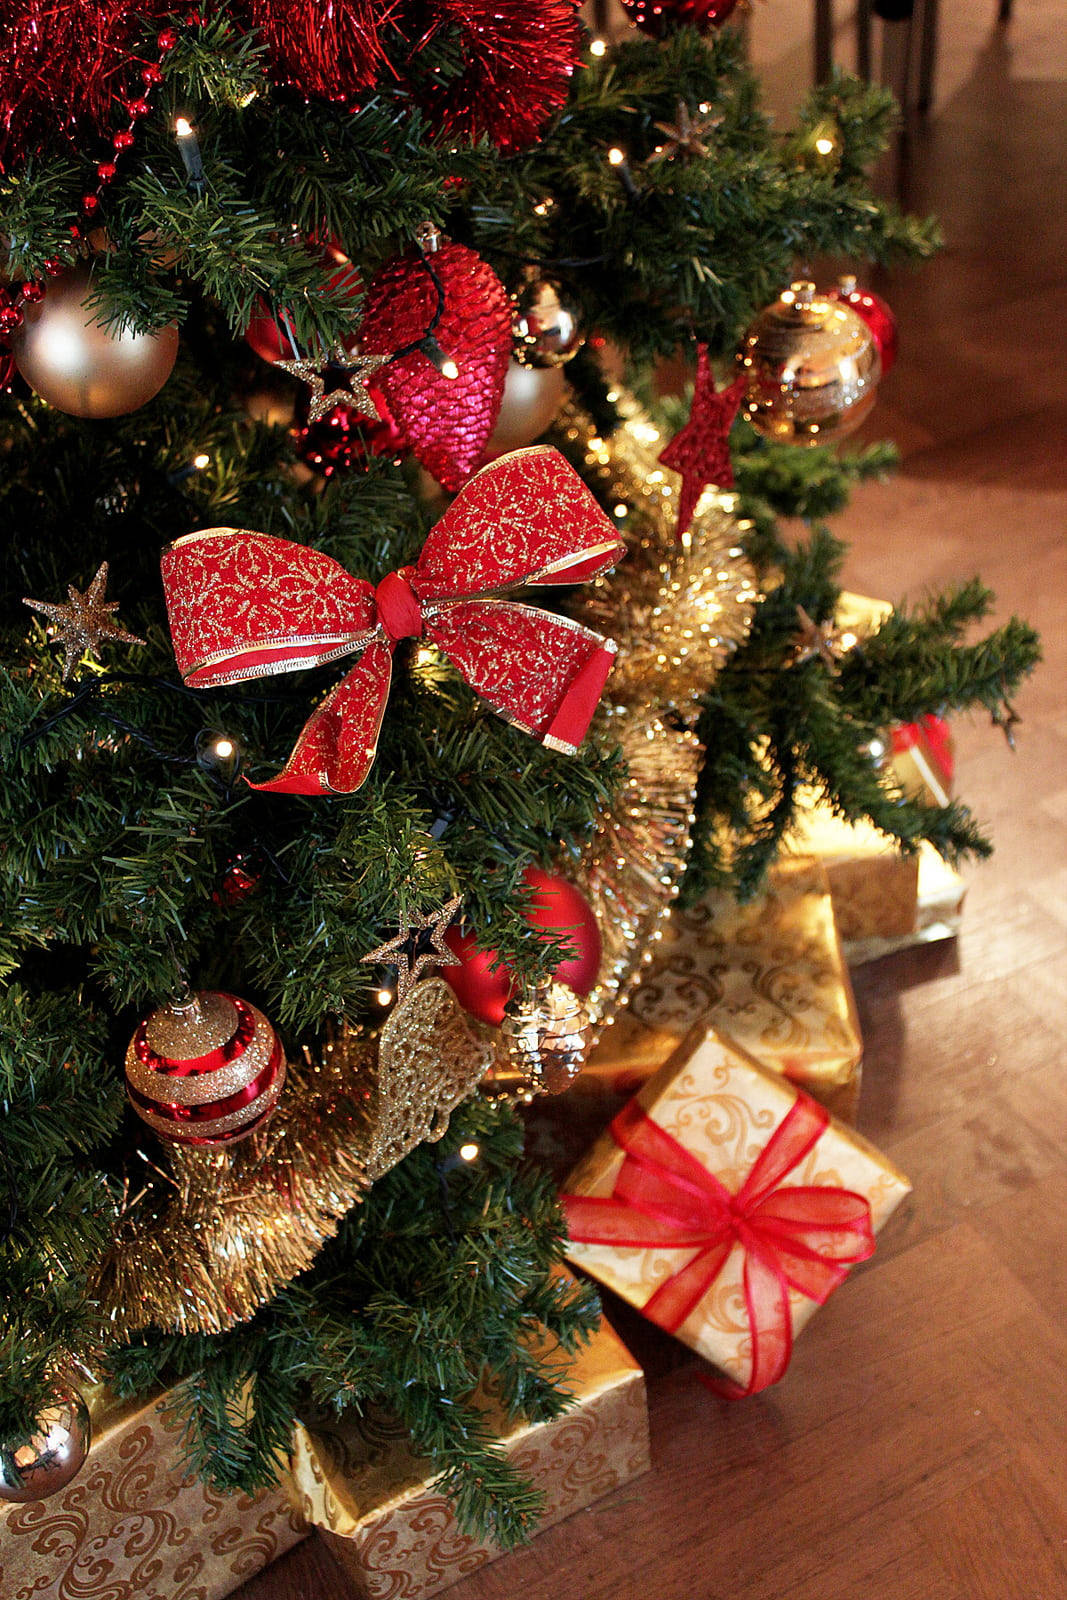 Beautiful Christmas Gifts Under The Tree Wallpaper